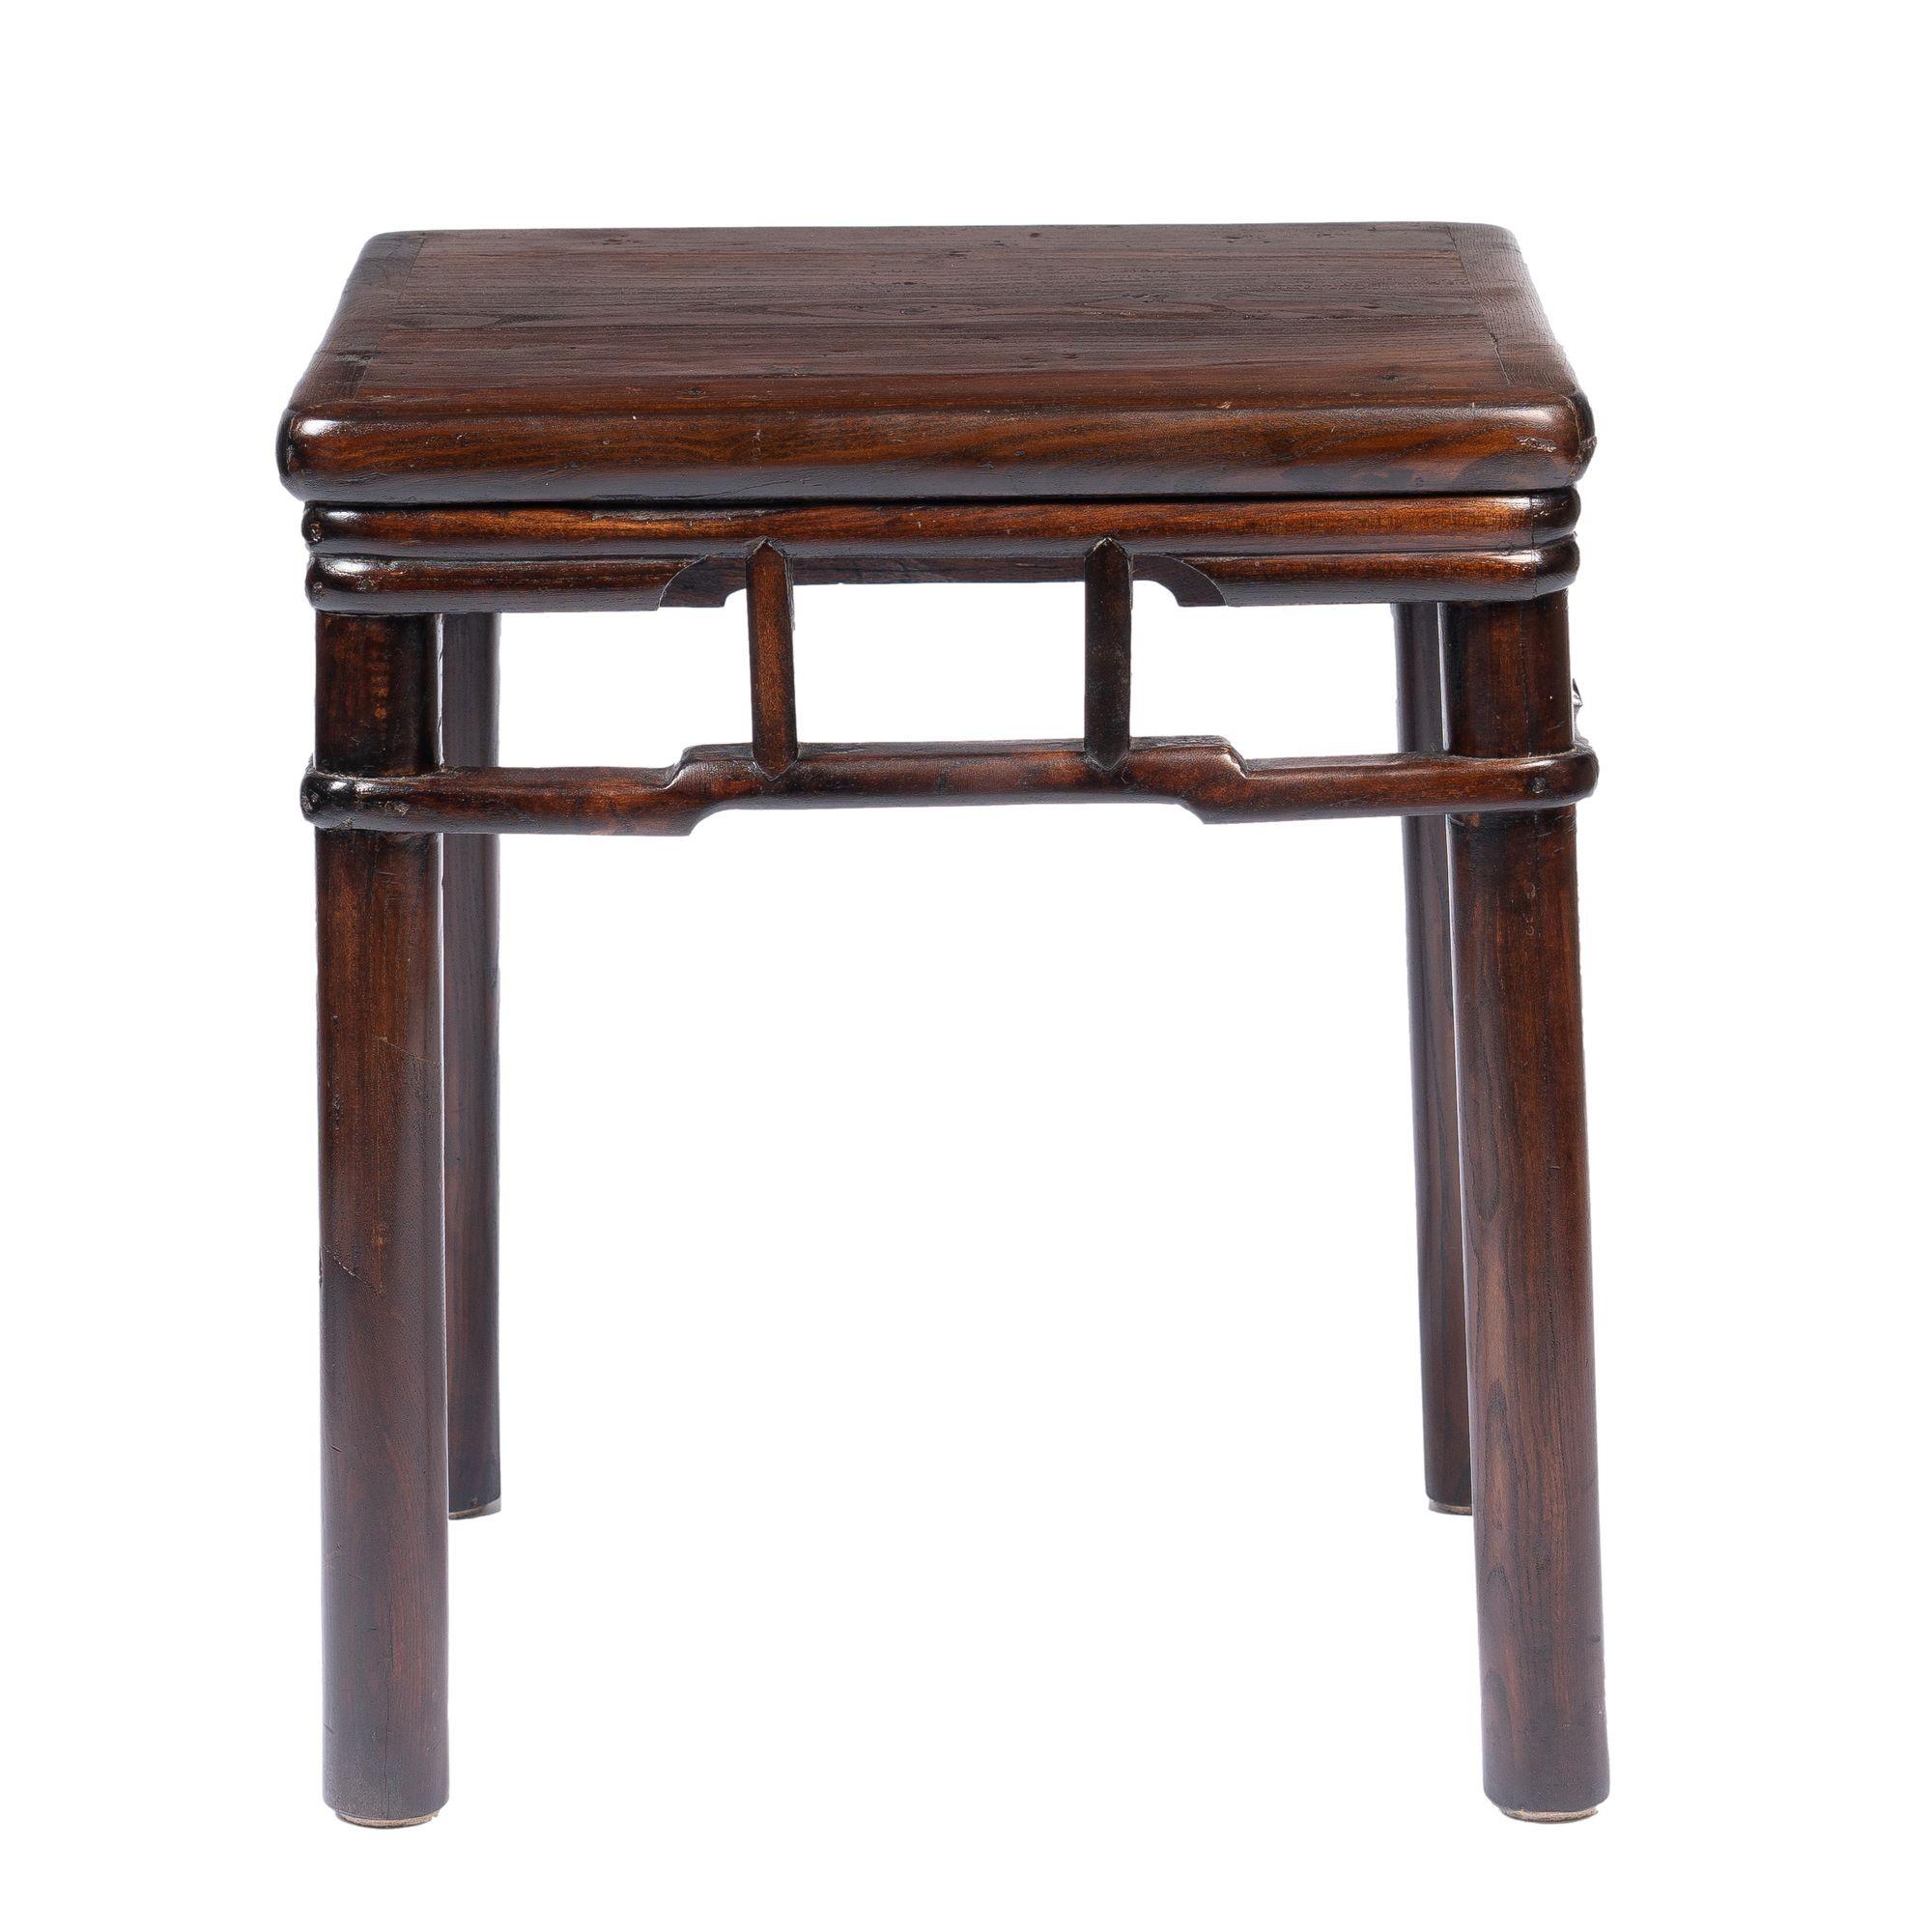 Pair of Chinese Elm Stools with Hump Back Rail, 1780-1820 For Sale 2